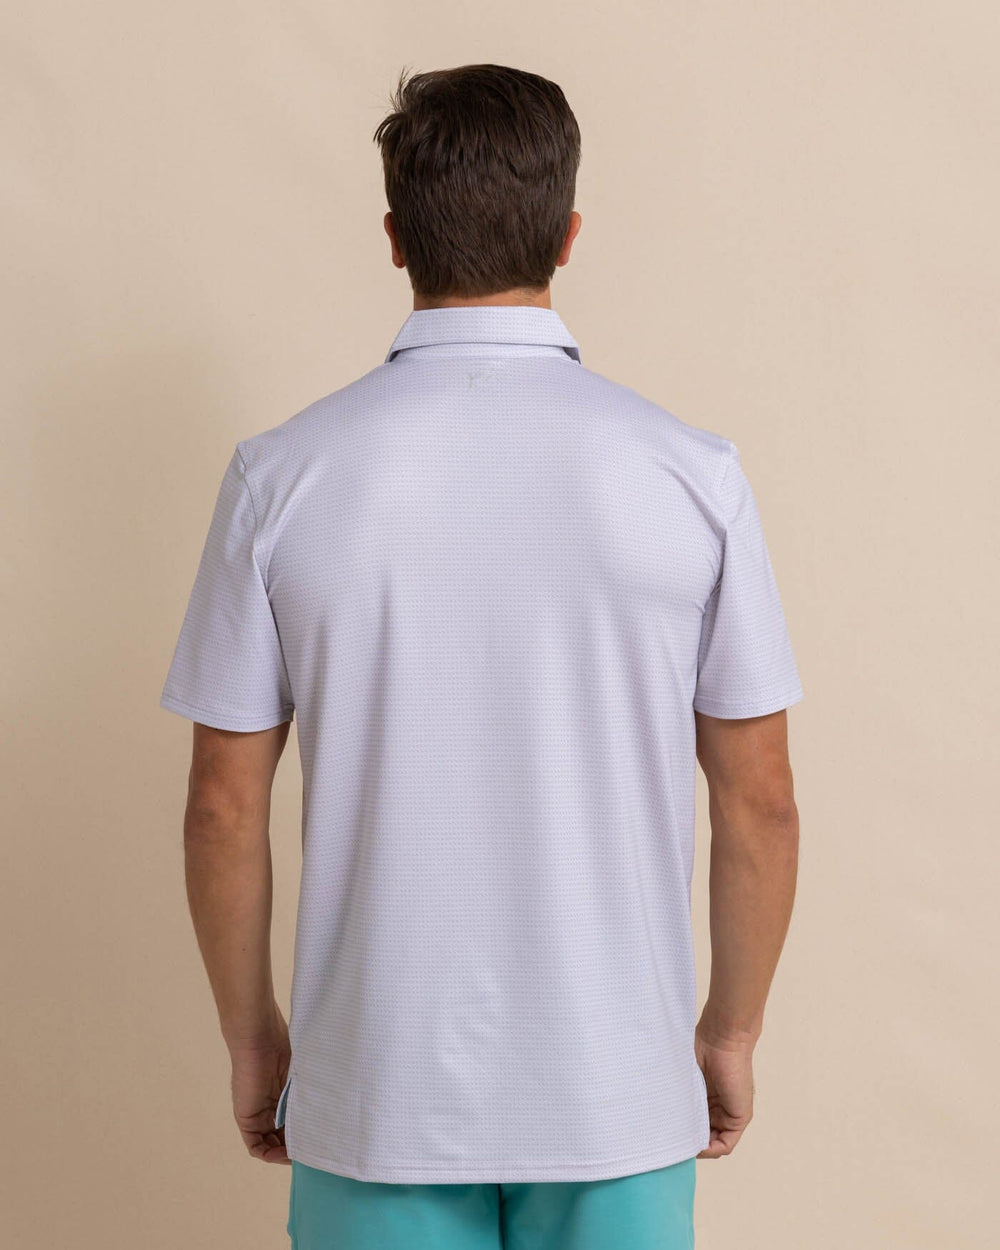 The detail view of the Southern Tide Driver Getting Ziggy With It Printed Polo by Southern Tide - Platinum Grey